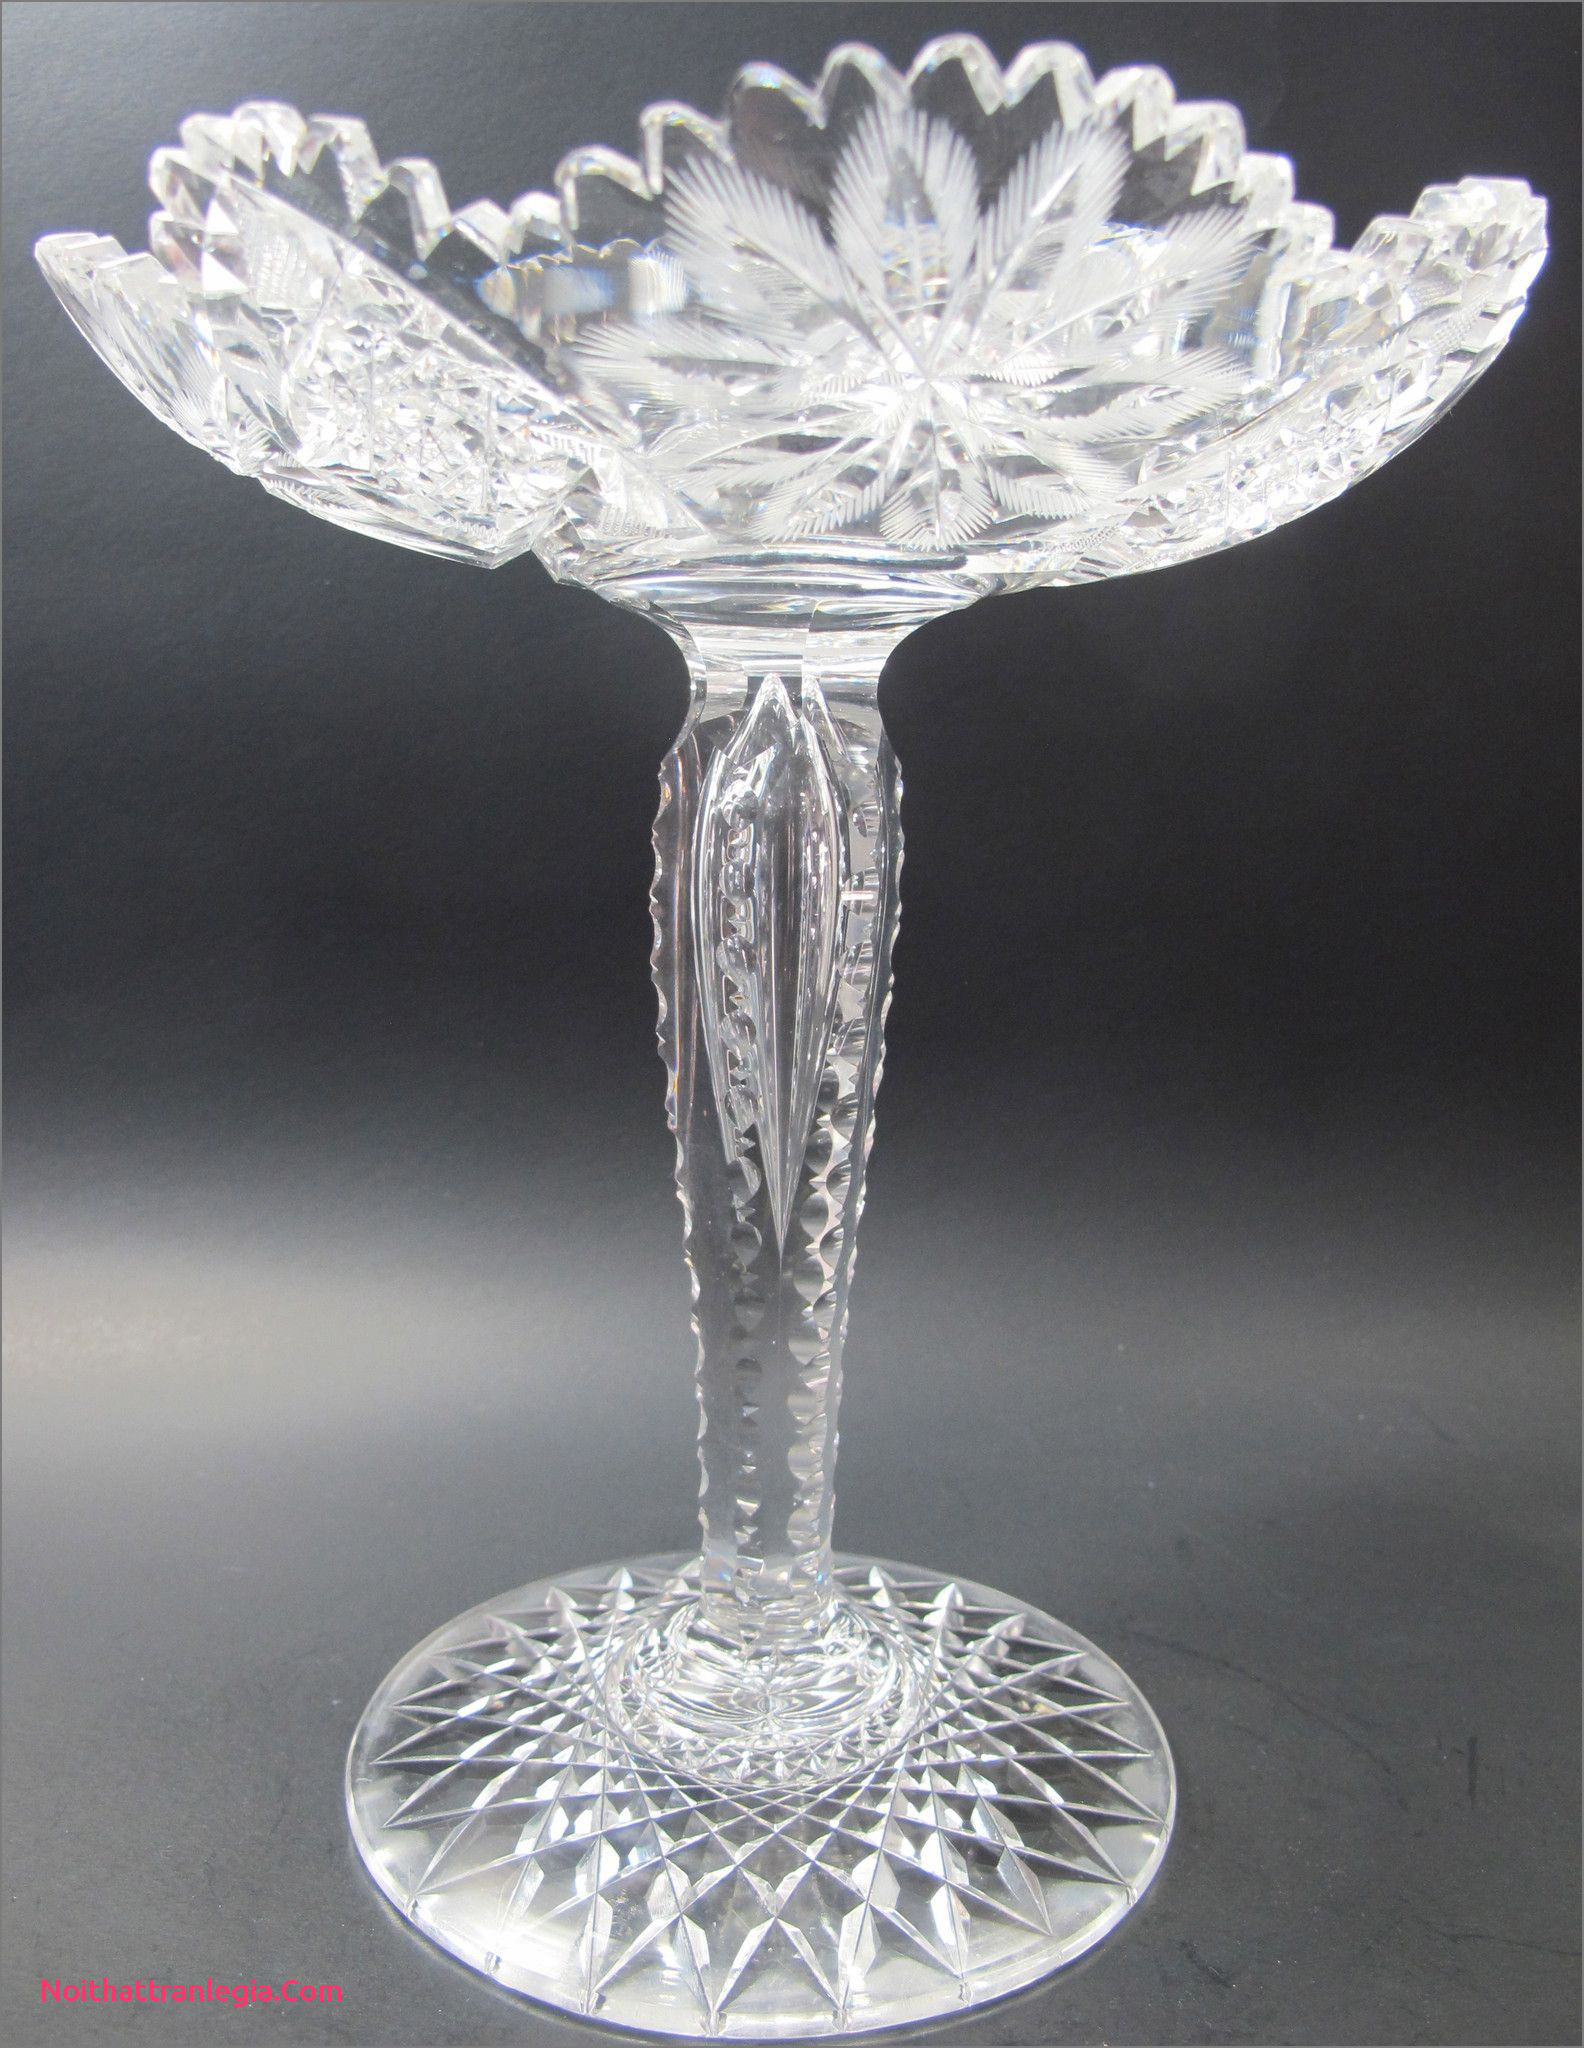 14 Trendy Plastic Pedestal Vase 2024 free download plastic pedestal vase of 20 cut glass antique vase noithattranlegia vases design in fering this abp antique cut glass pote from the american brilliant period 1886 1916 9 5